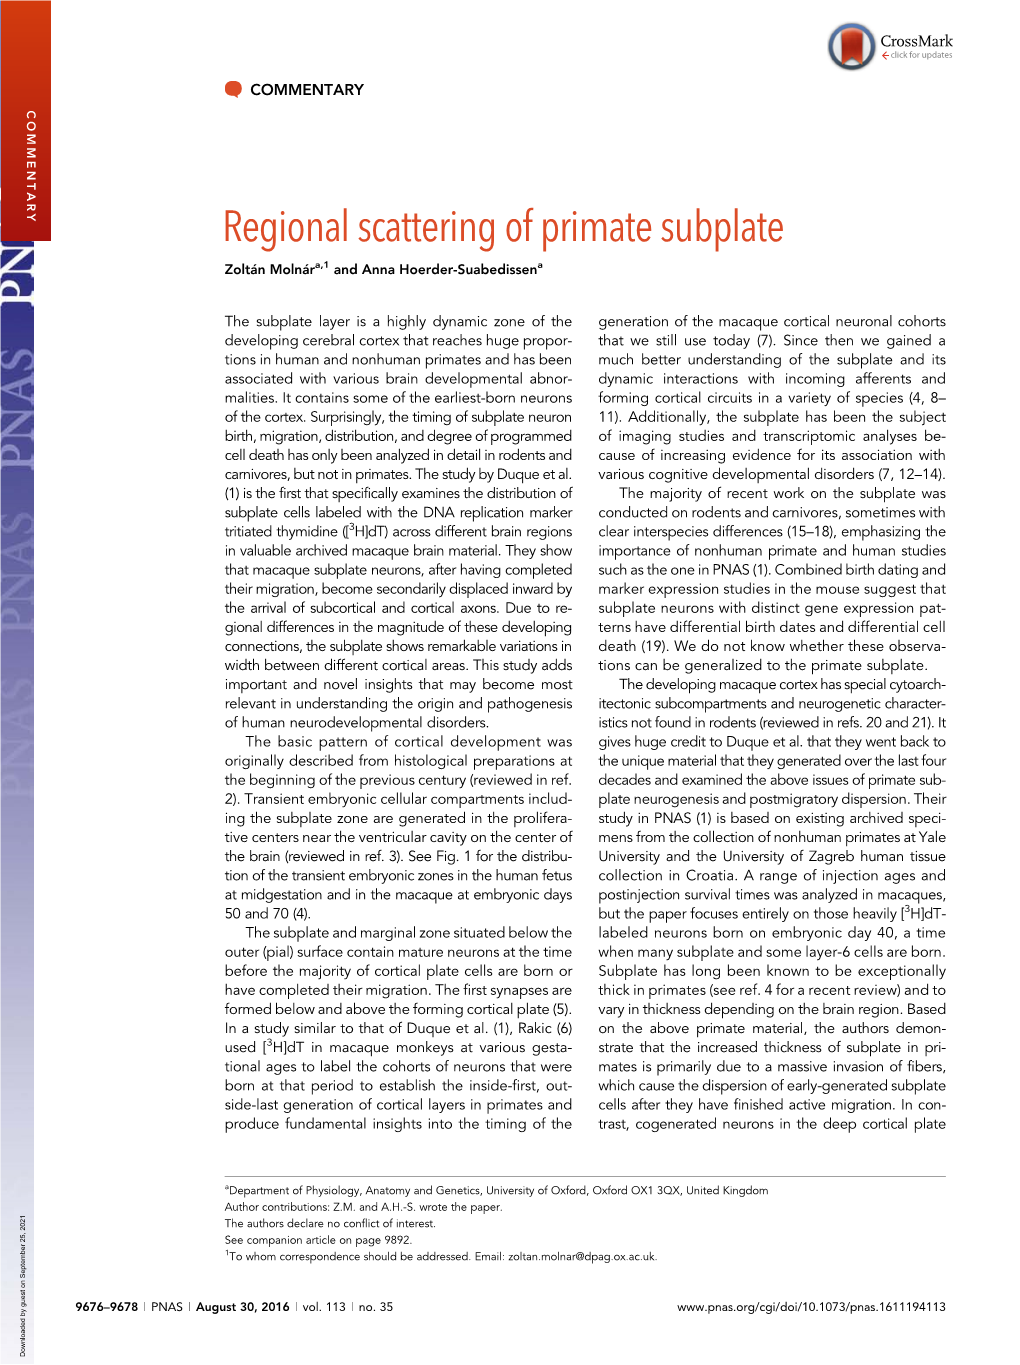 Regional Scattering of Primate Subplate Zolt ´Anmoln ´Ara,1 and Anna Hoerder-Suabedissena